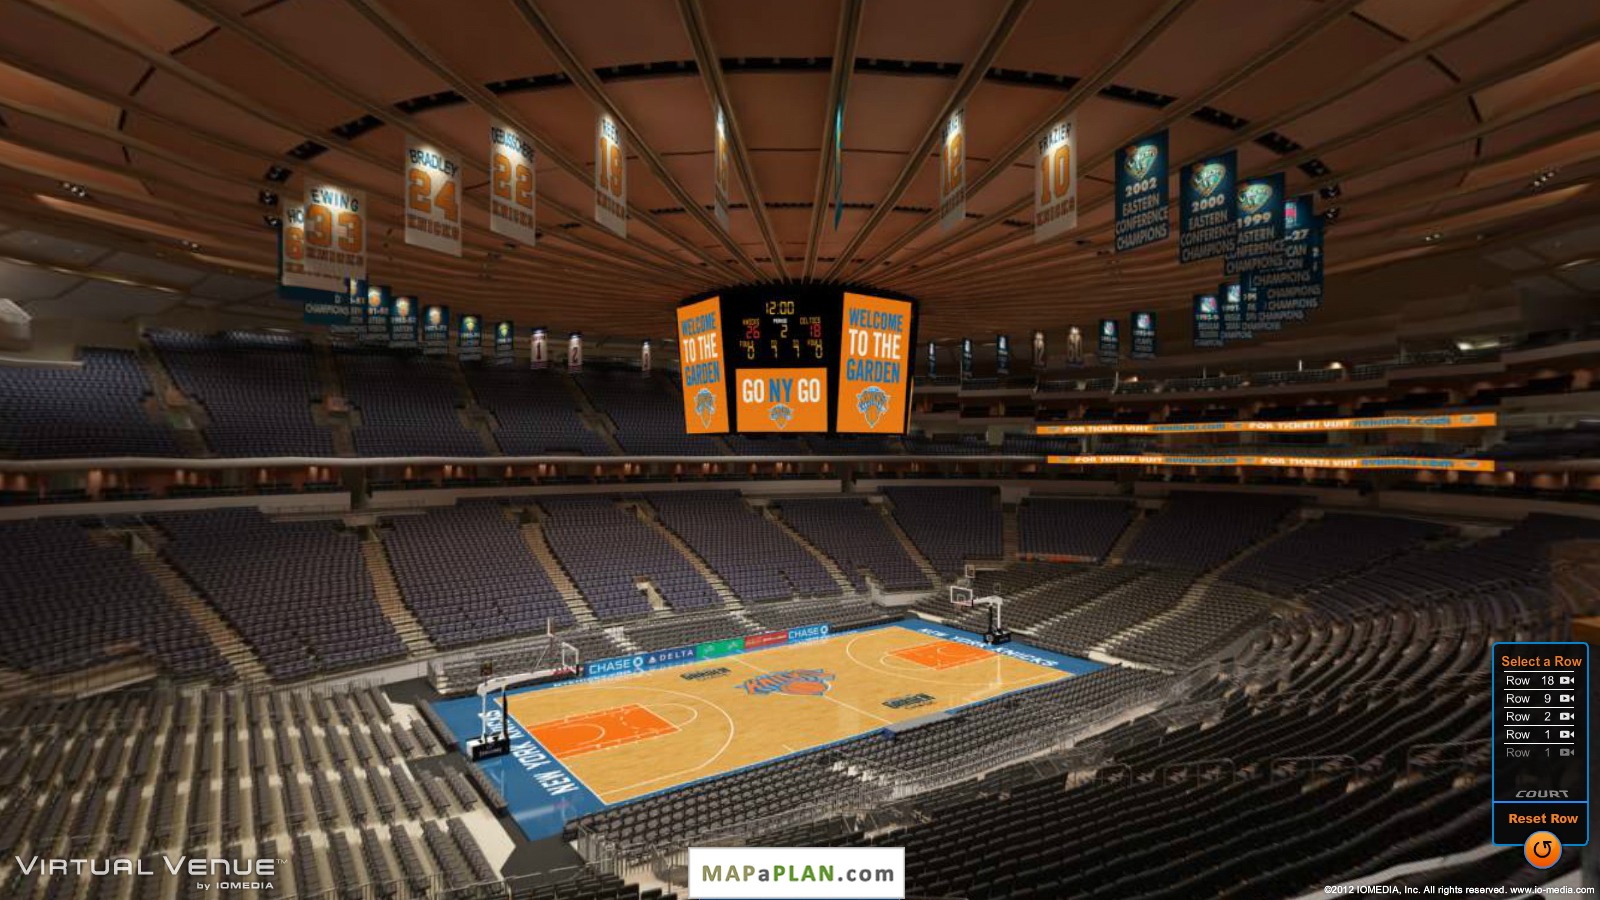 Madison square garden seating chart View from section 222